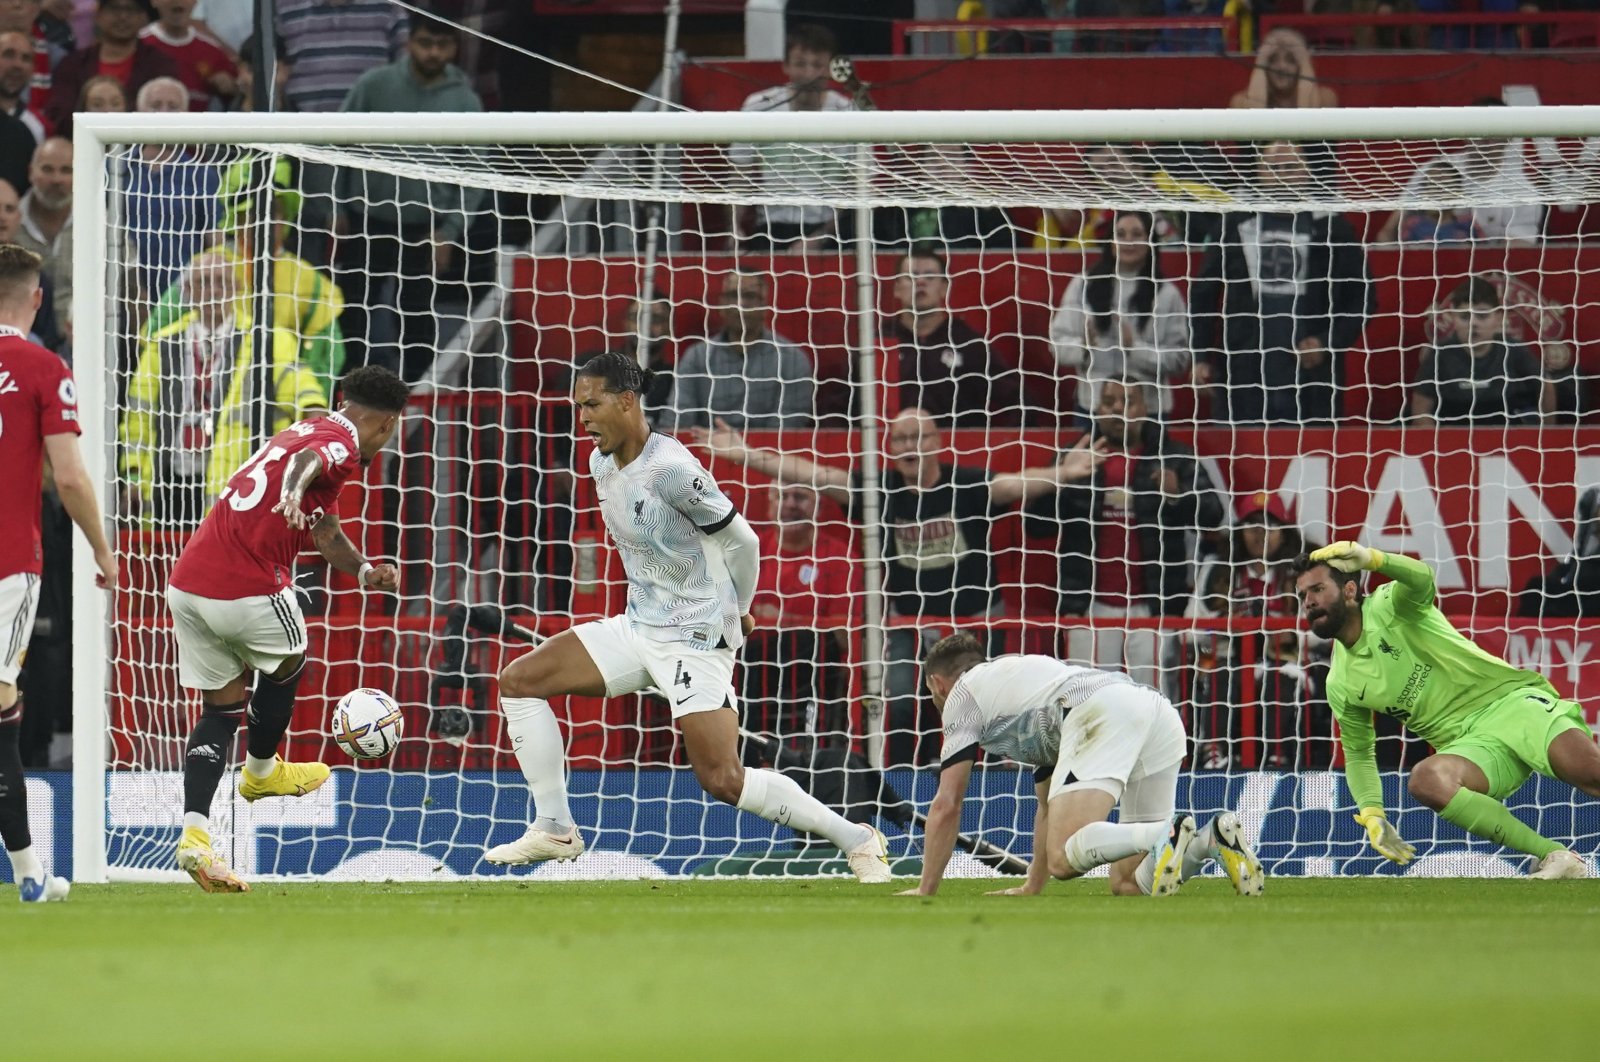 Manchester United&#039;s Jadon Sancho scores his side&#039;s first goal during the English Premier League soccer match between Manchester United and Liverpool at Old Trafford stadium, in Manchester, England, Aug. 22, 2022. (AP Photo)